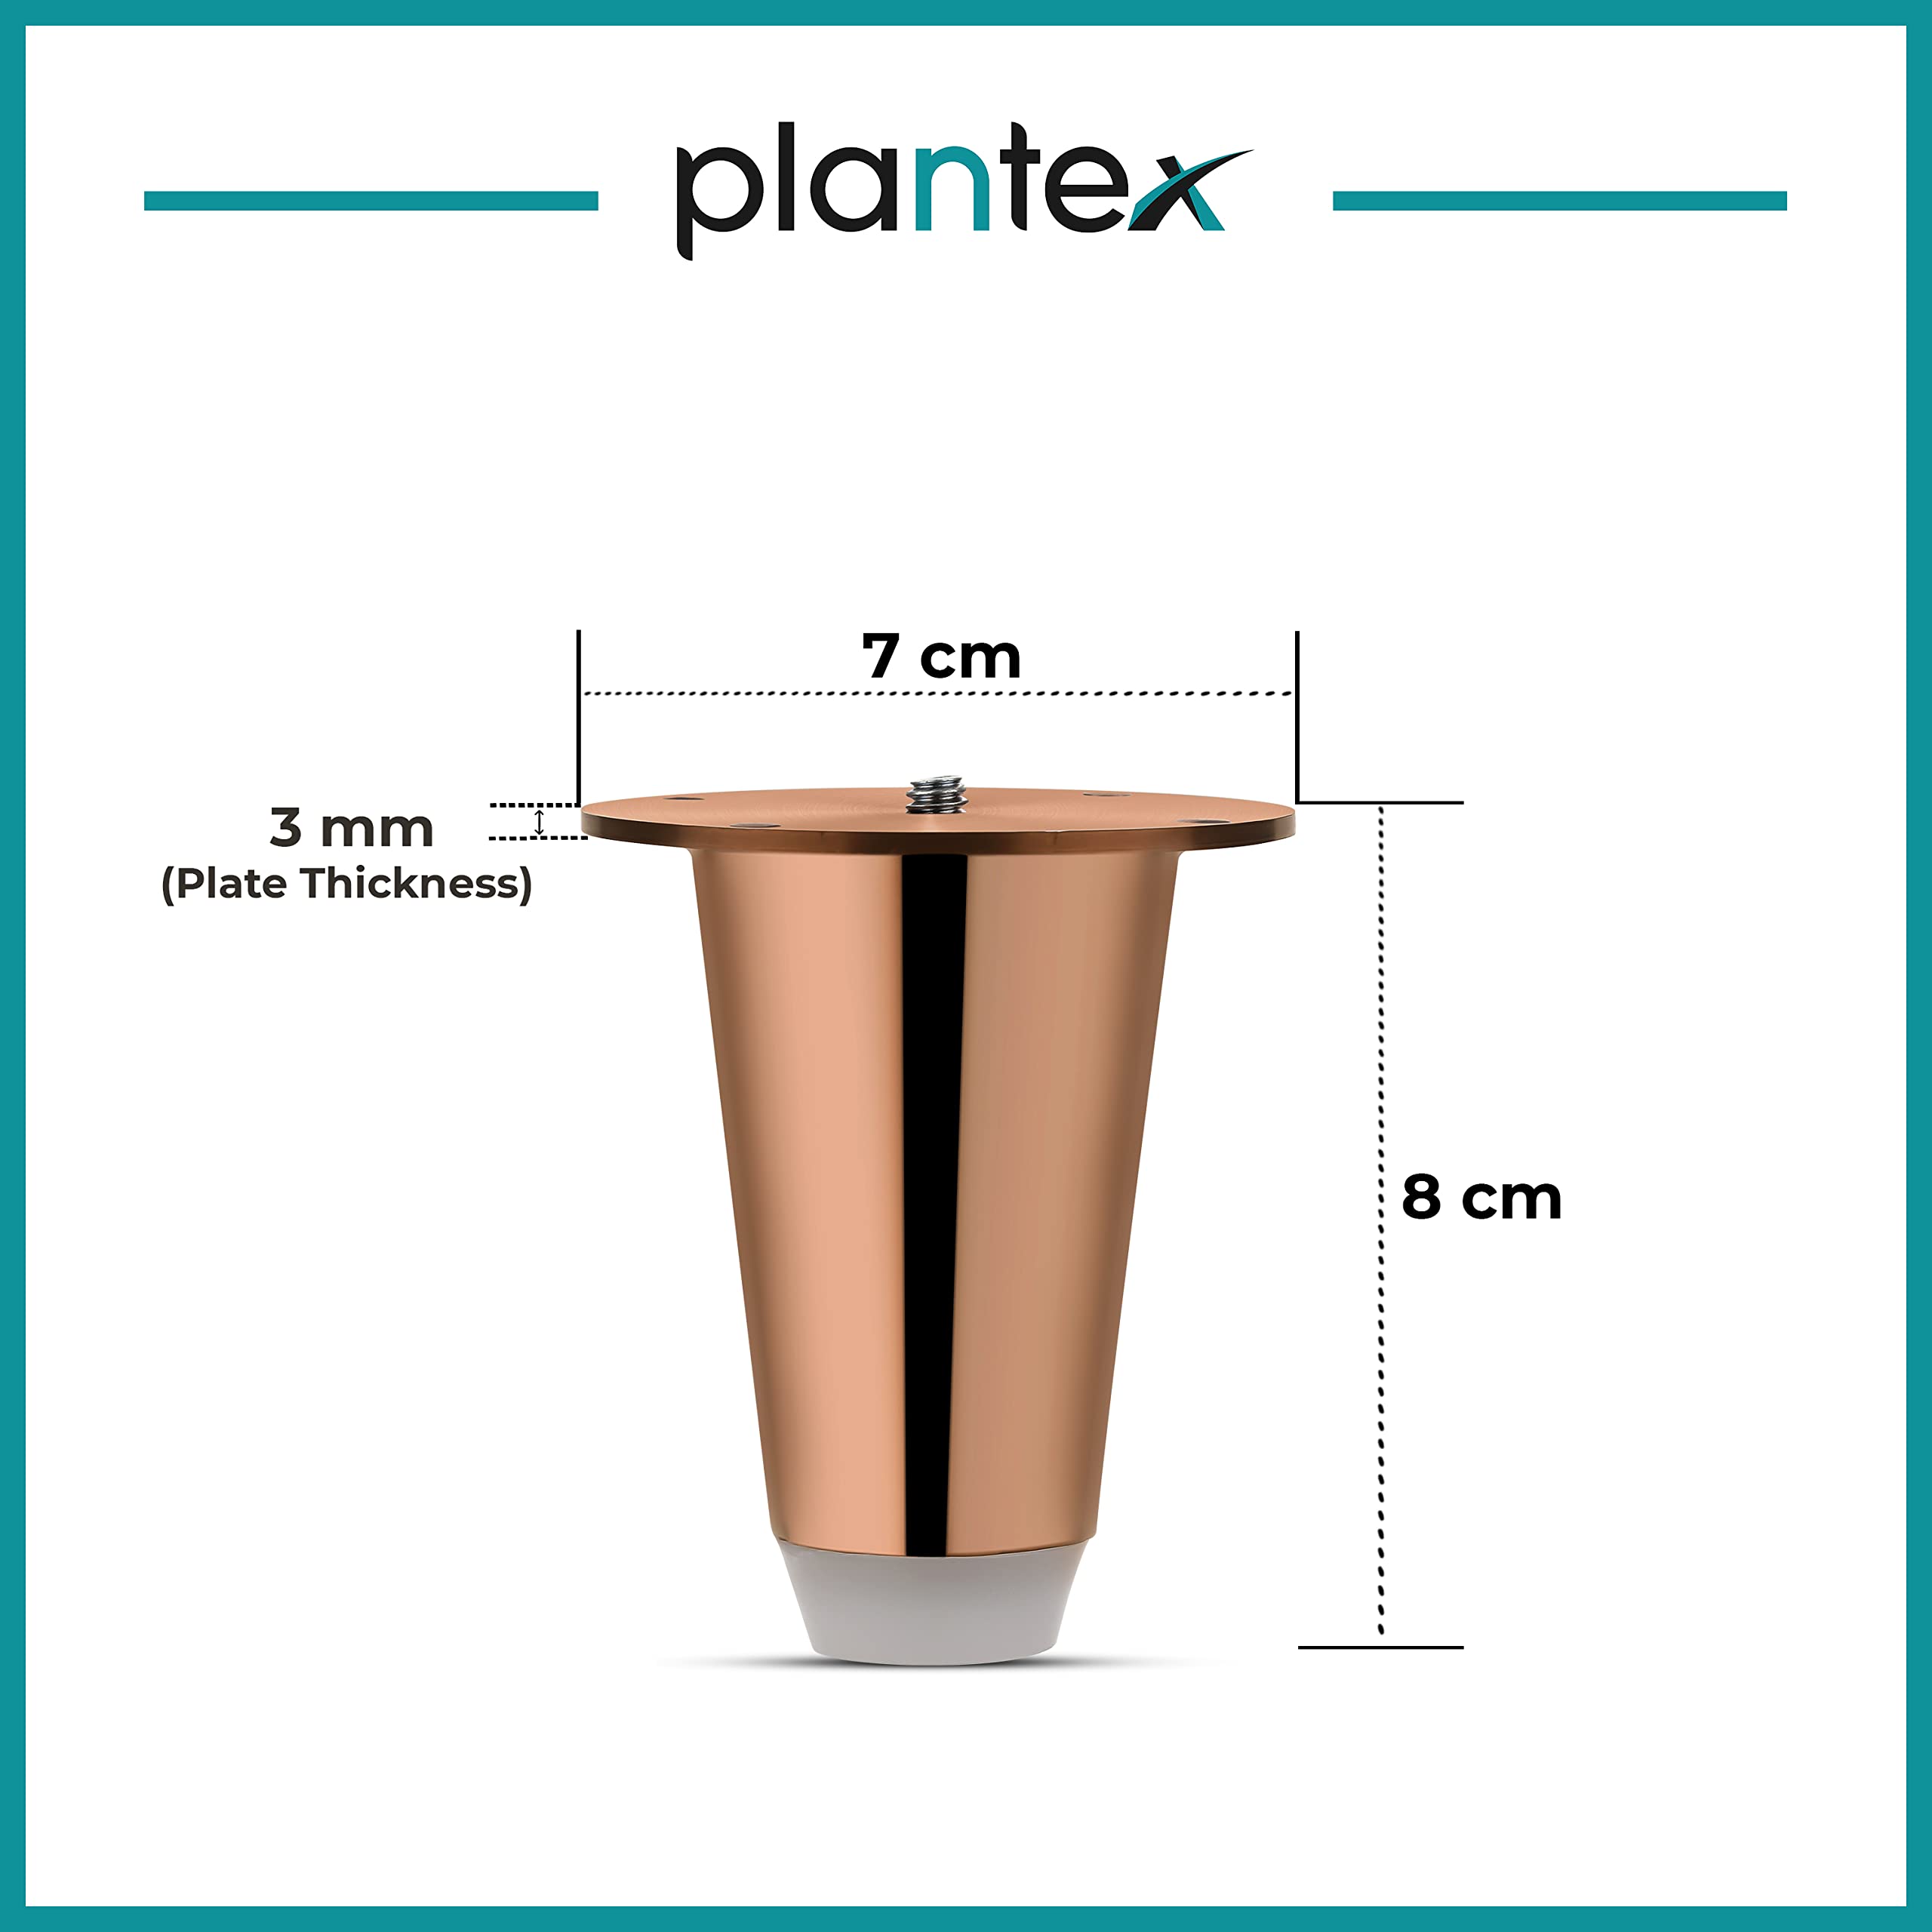 Plantex Heavy Duty Stainless Steel 3 inch Sofa Leg/Bed Furniture Leg Pair for Home Furnitures (DTS-53, Rose Gold) – 8 Pcs